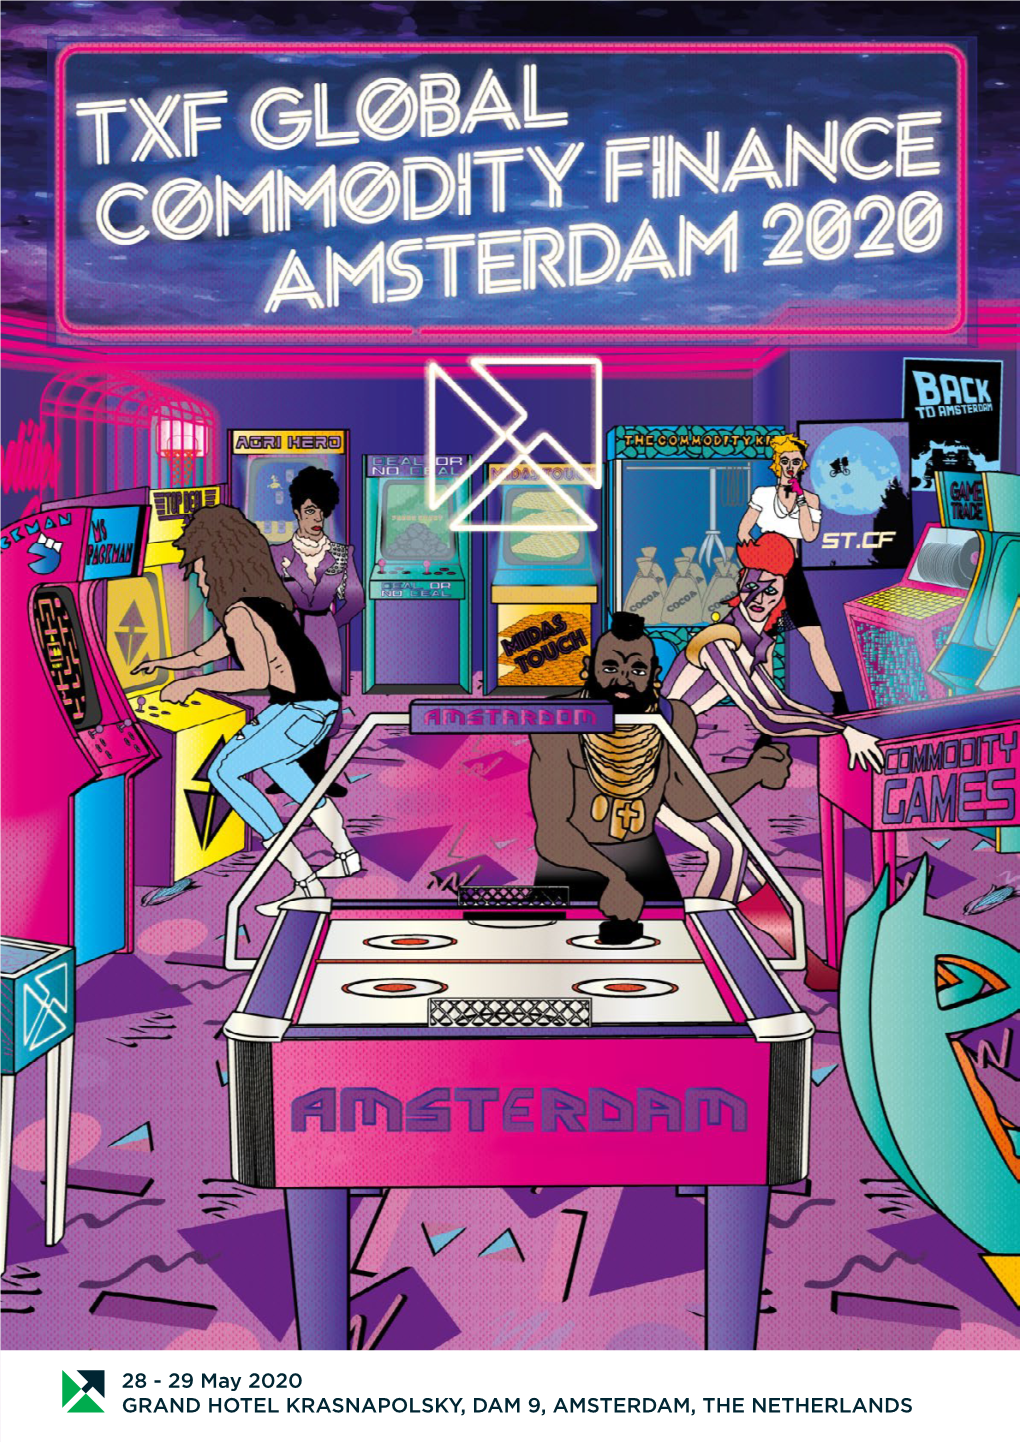 29 May 2020 GRAND HOTEL KRASNAPOLSKY, DAM 9, AMSTERDAM, the NETHERLANDS Thank You to Our Sponsors